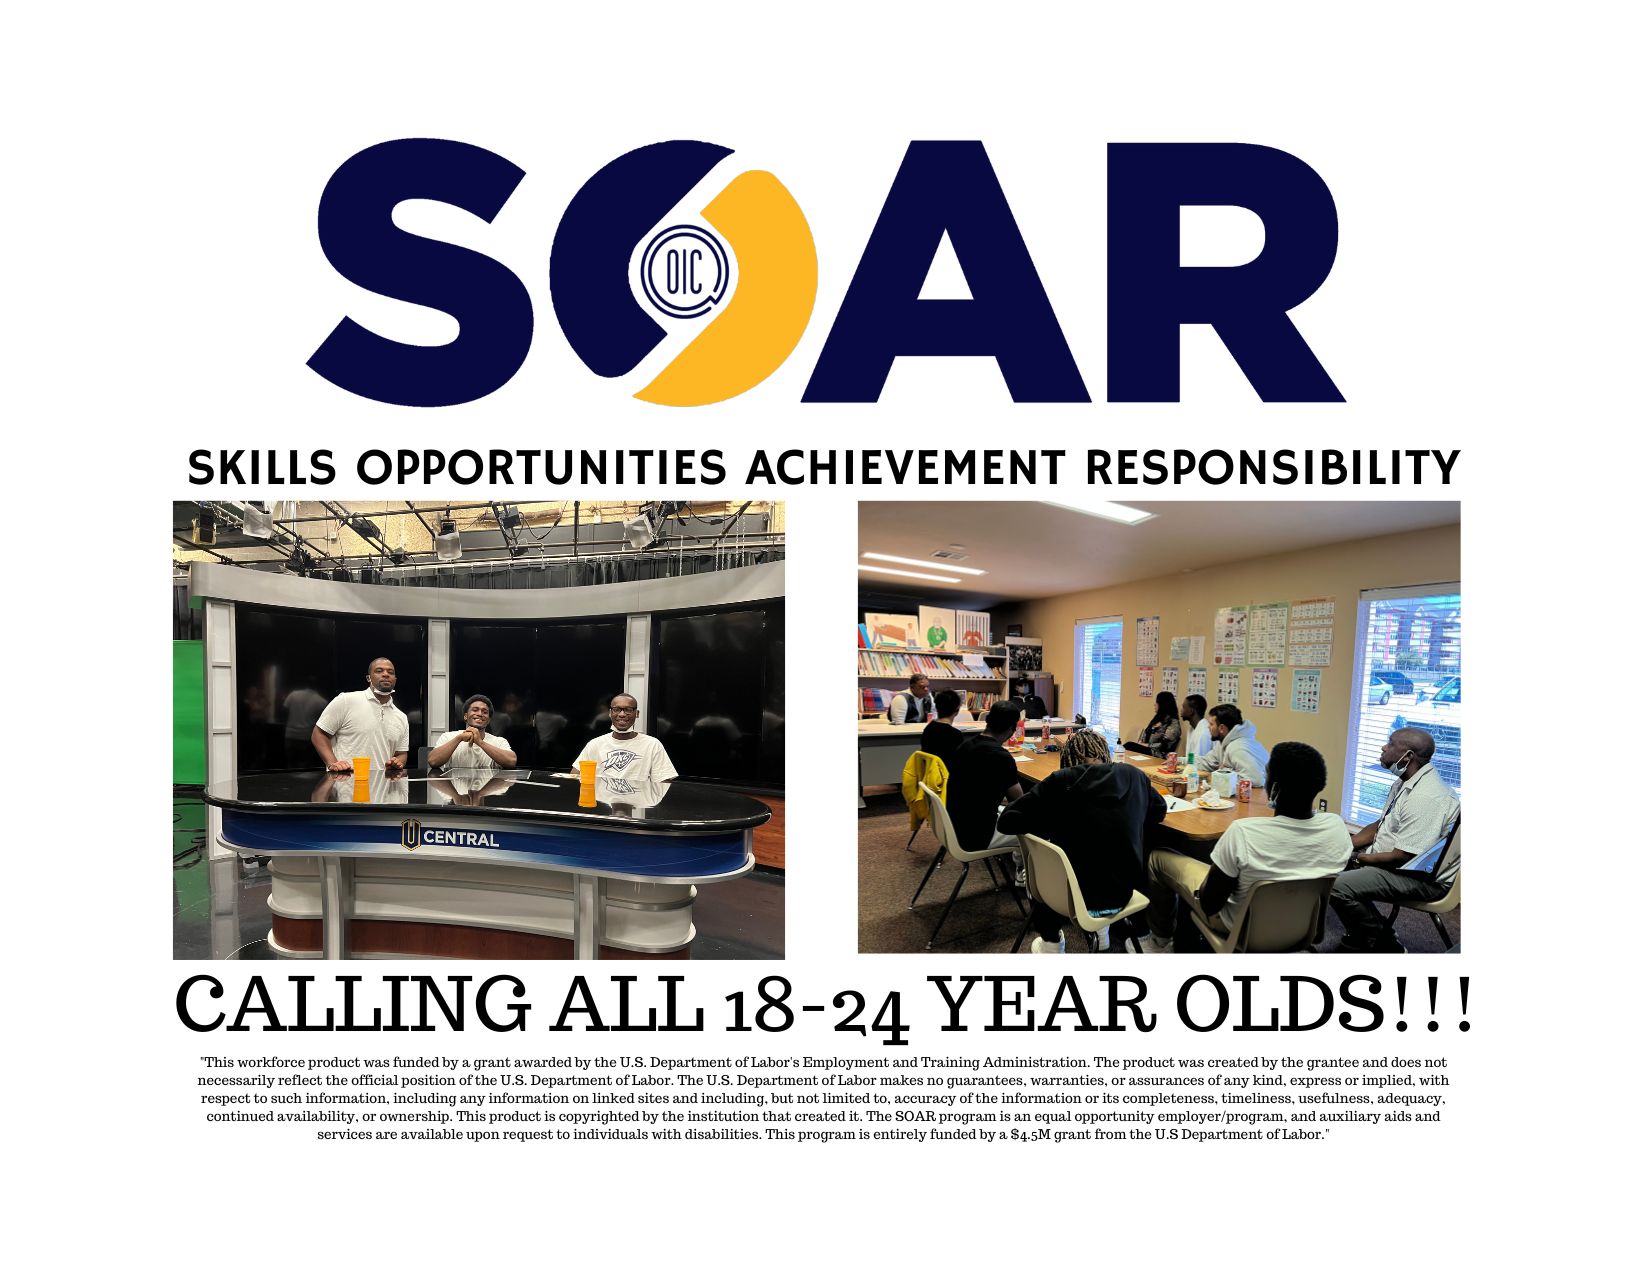 SOAR Skills Opportunities Achievement Responsibility - Call all 18-24 year olds!